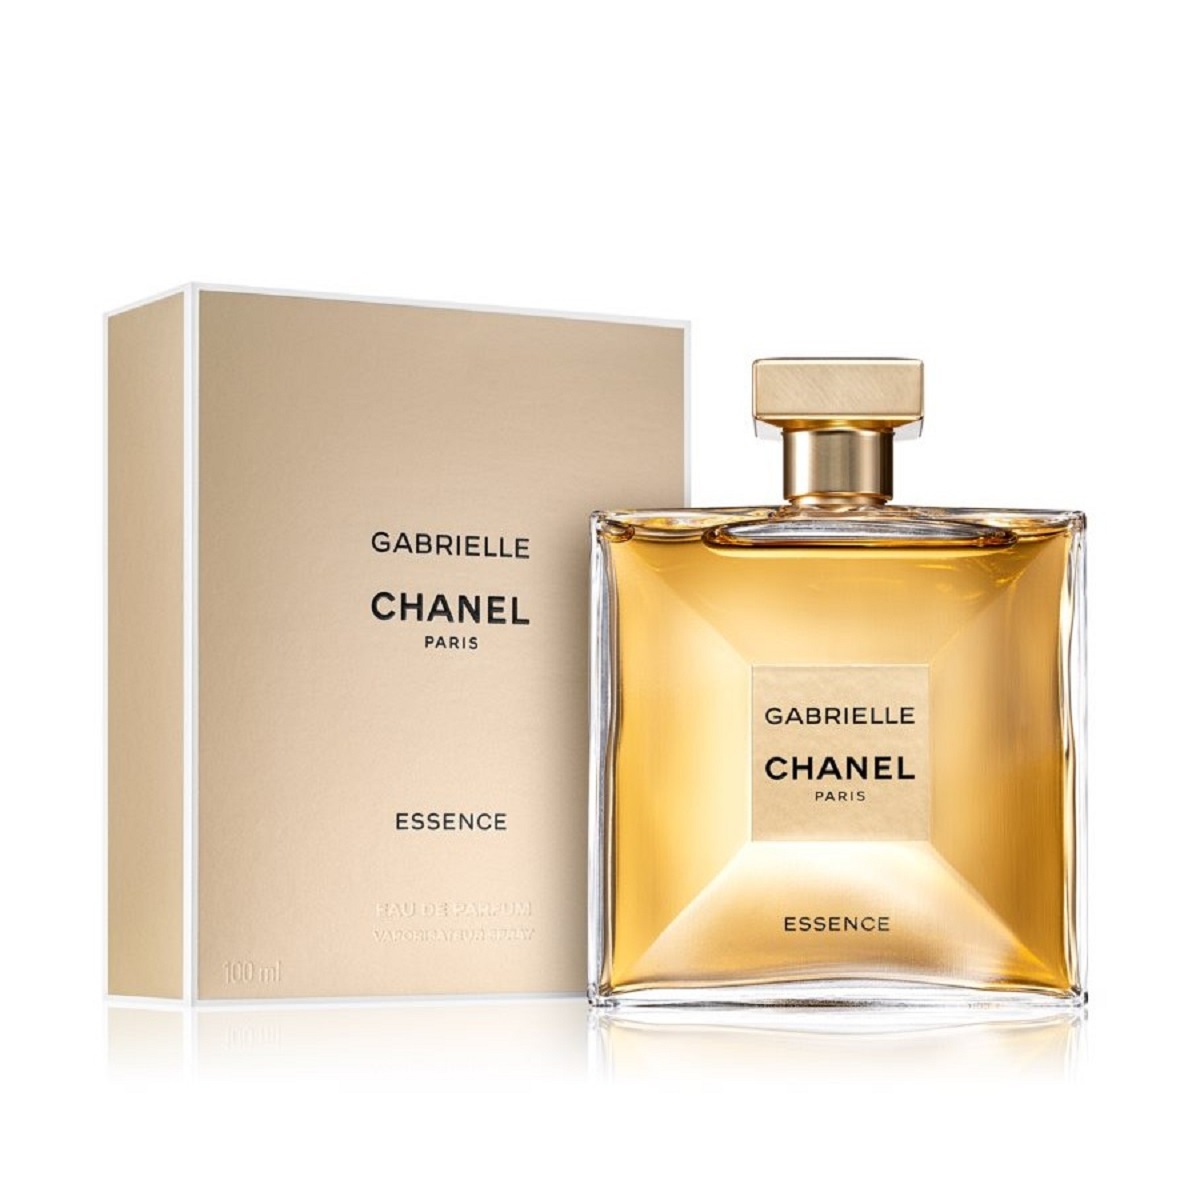 Chanel Gabrielle Perfume on Shop Display for Sale Fragrance Launched by  French Couturier Gabrielle Coco Chanel Editorial Stock Image  Image of  parfum gift 175666574